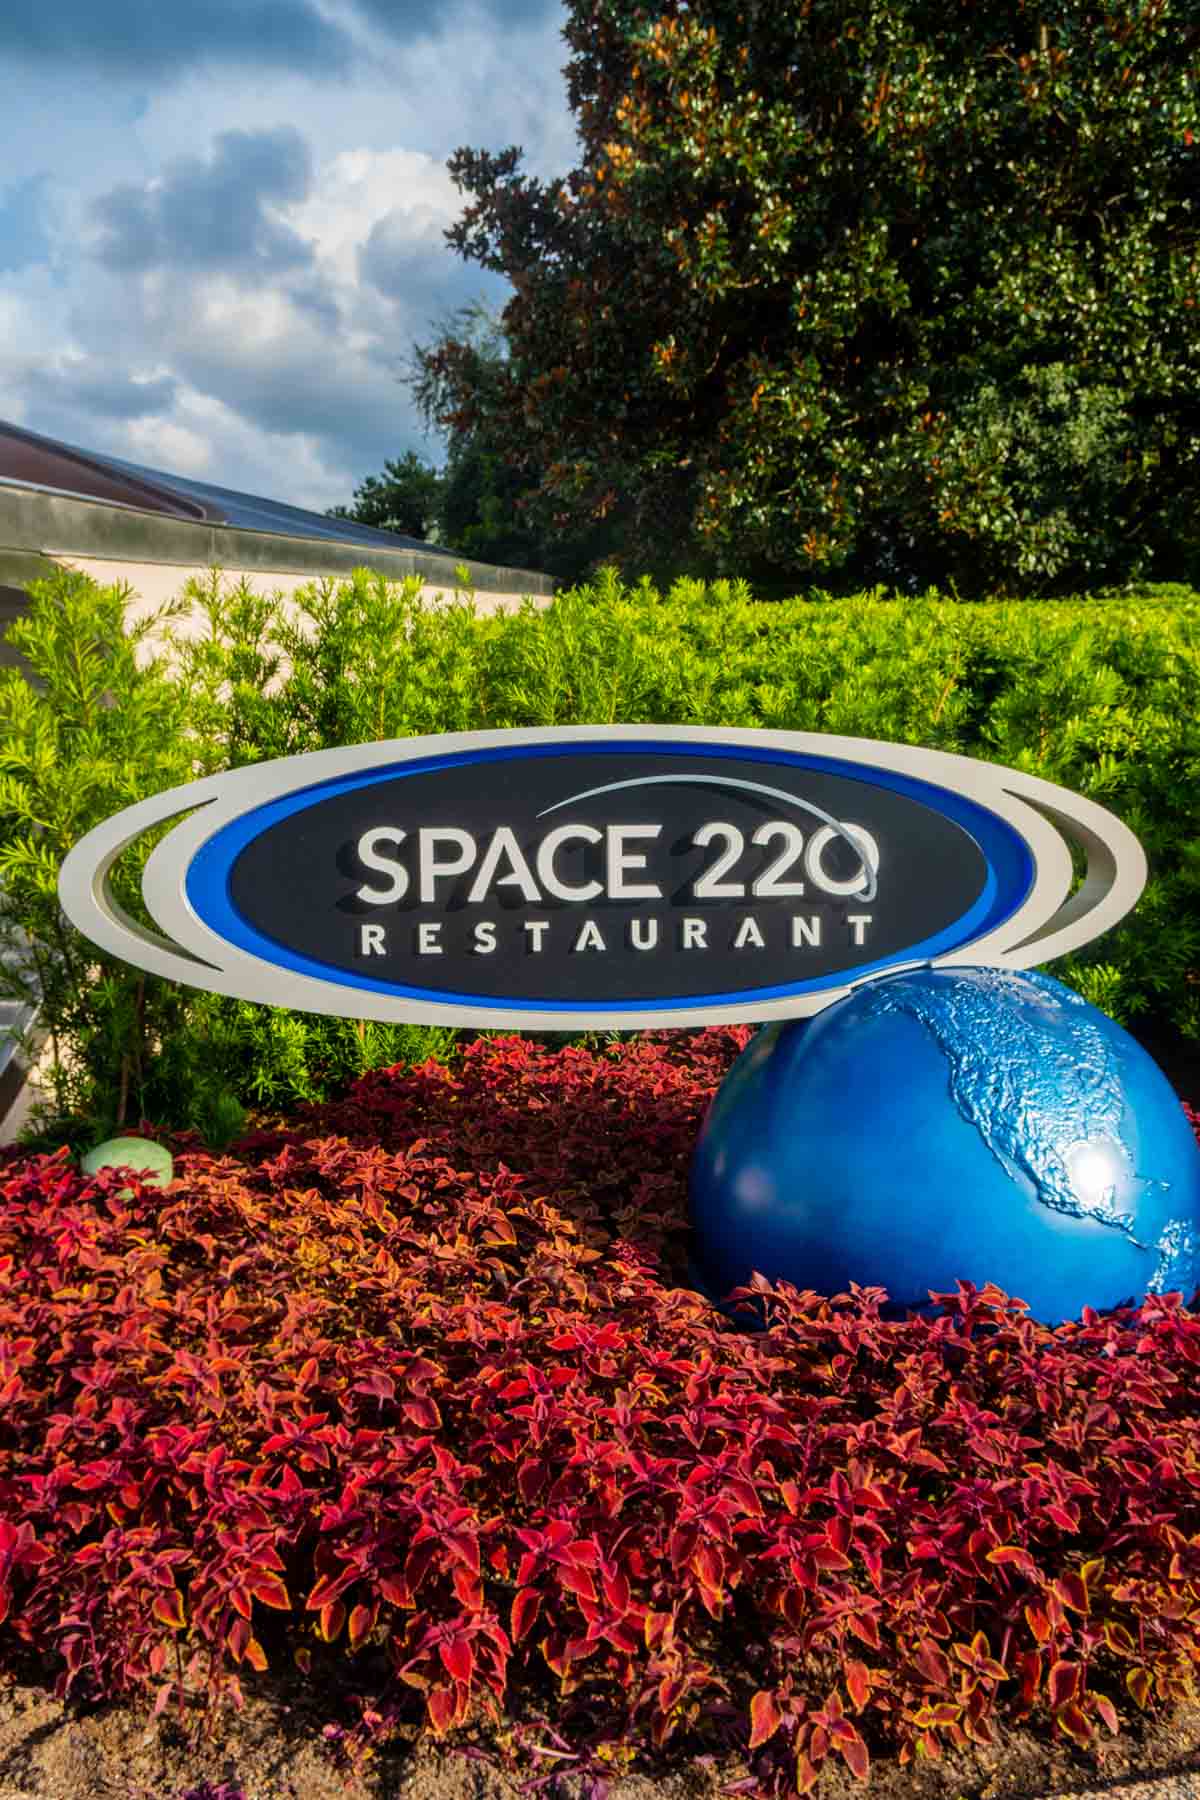 Space 220 restaurant sign in Epcot